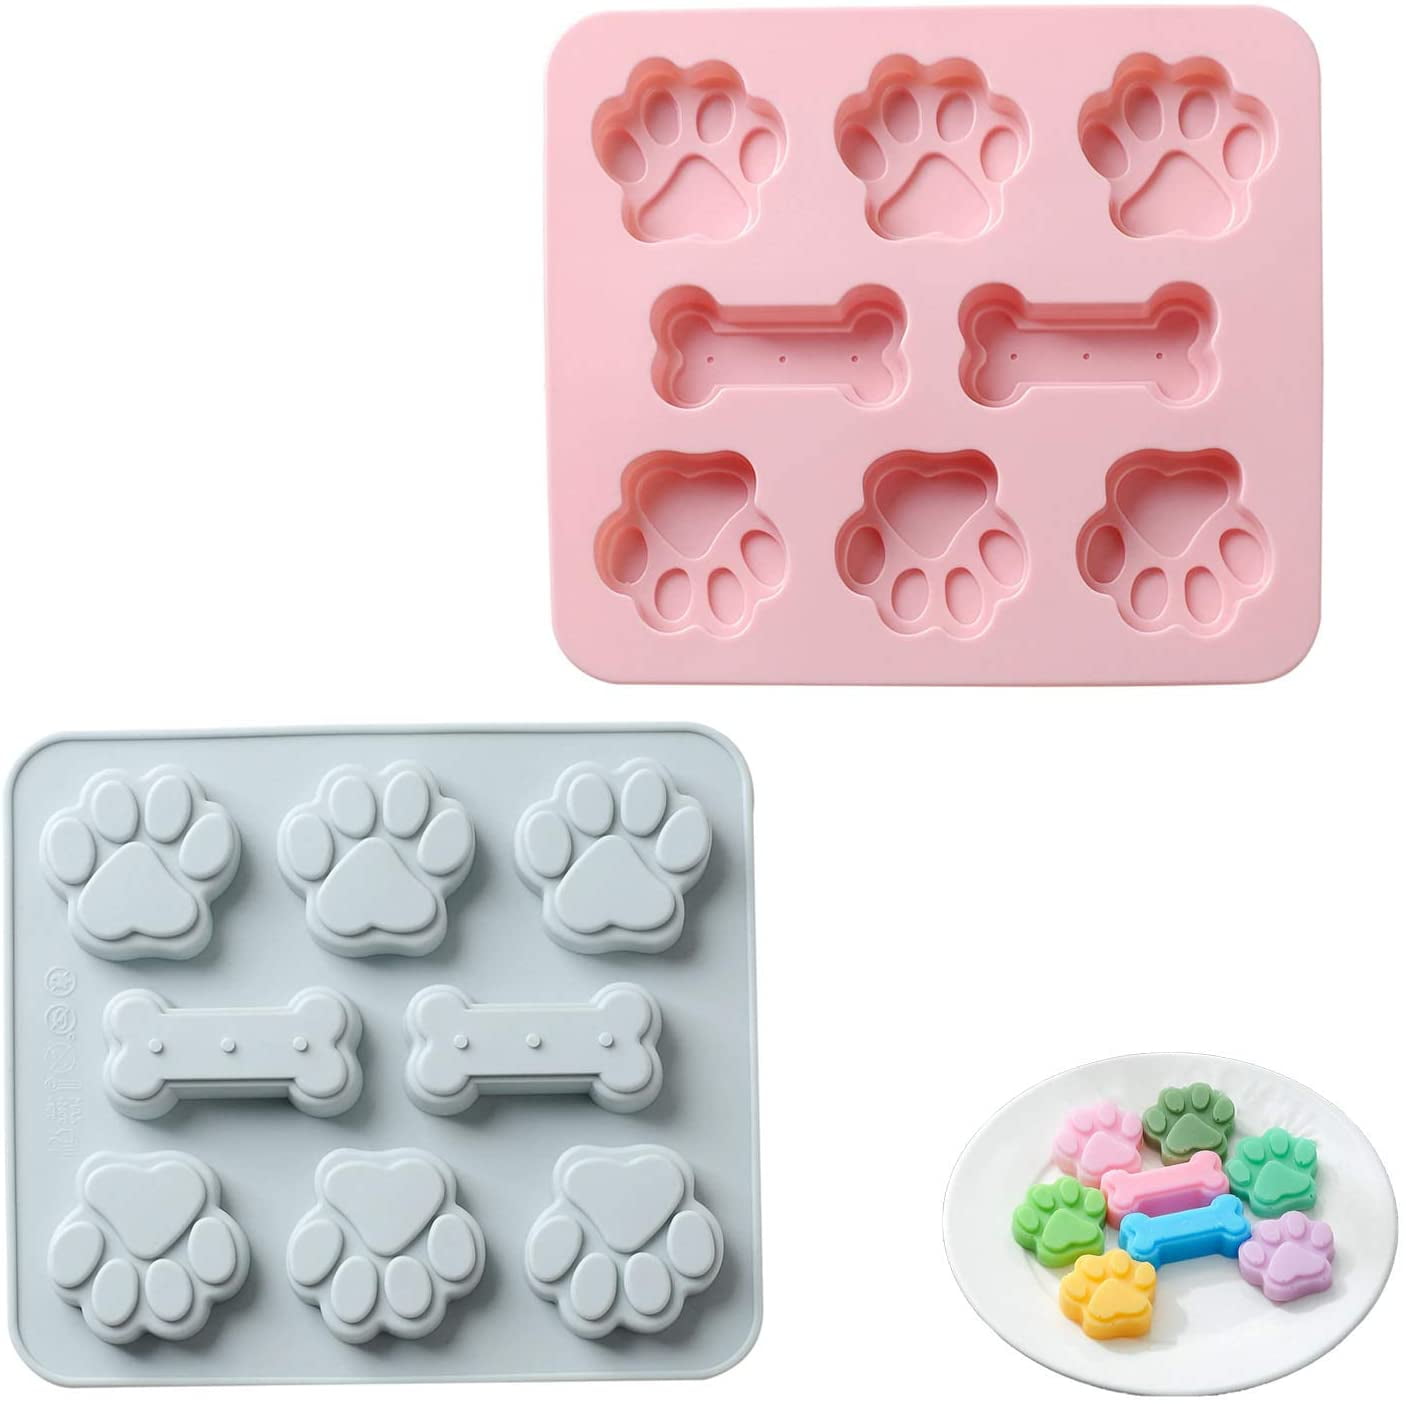 Cute Paw Cat Dog Silicone Mould Chocolate Jelly Homemade Wax Melts Treats Gummy